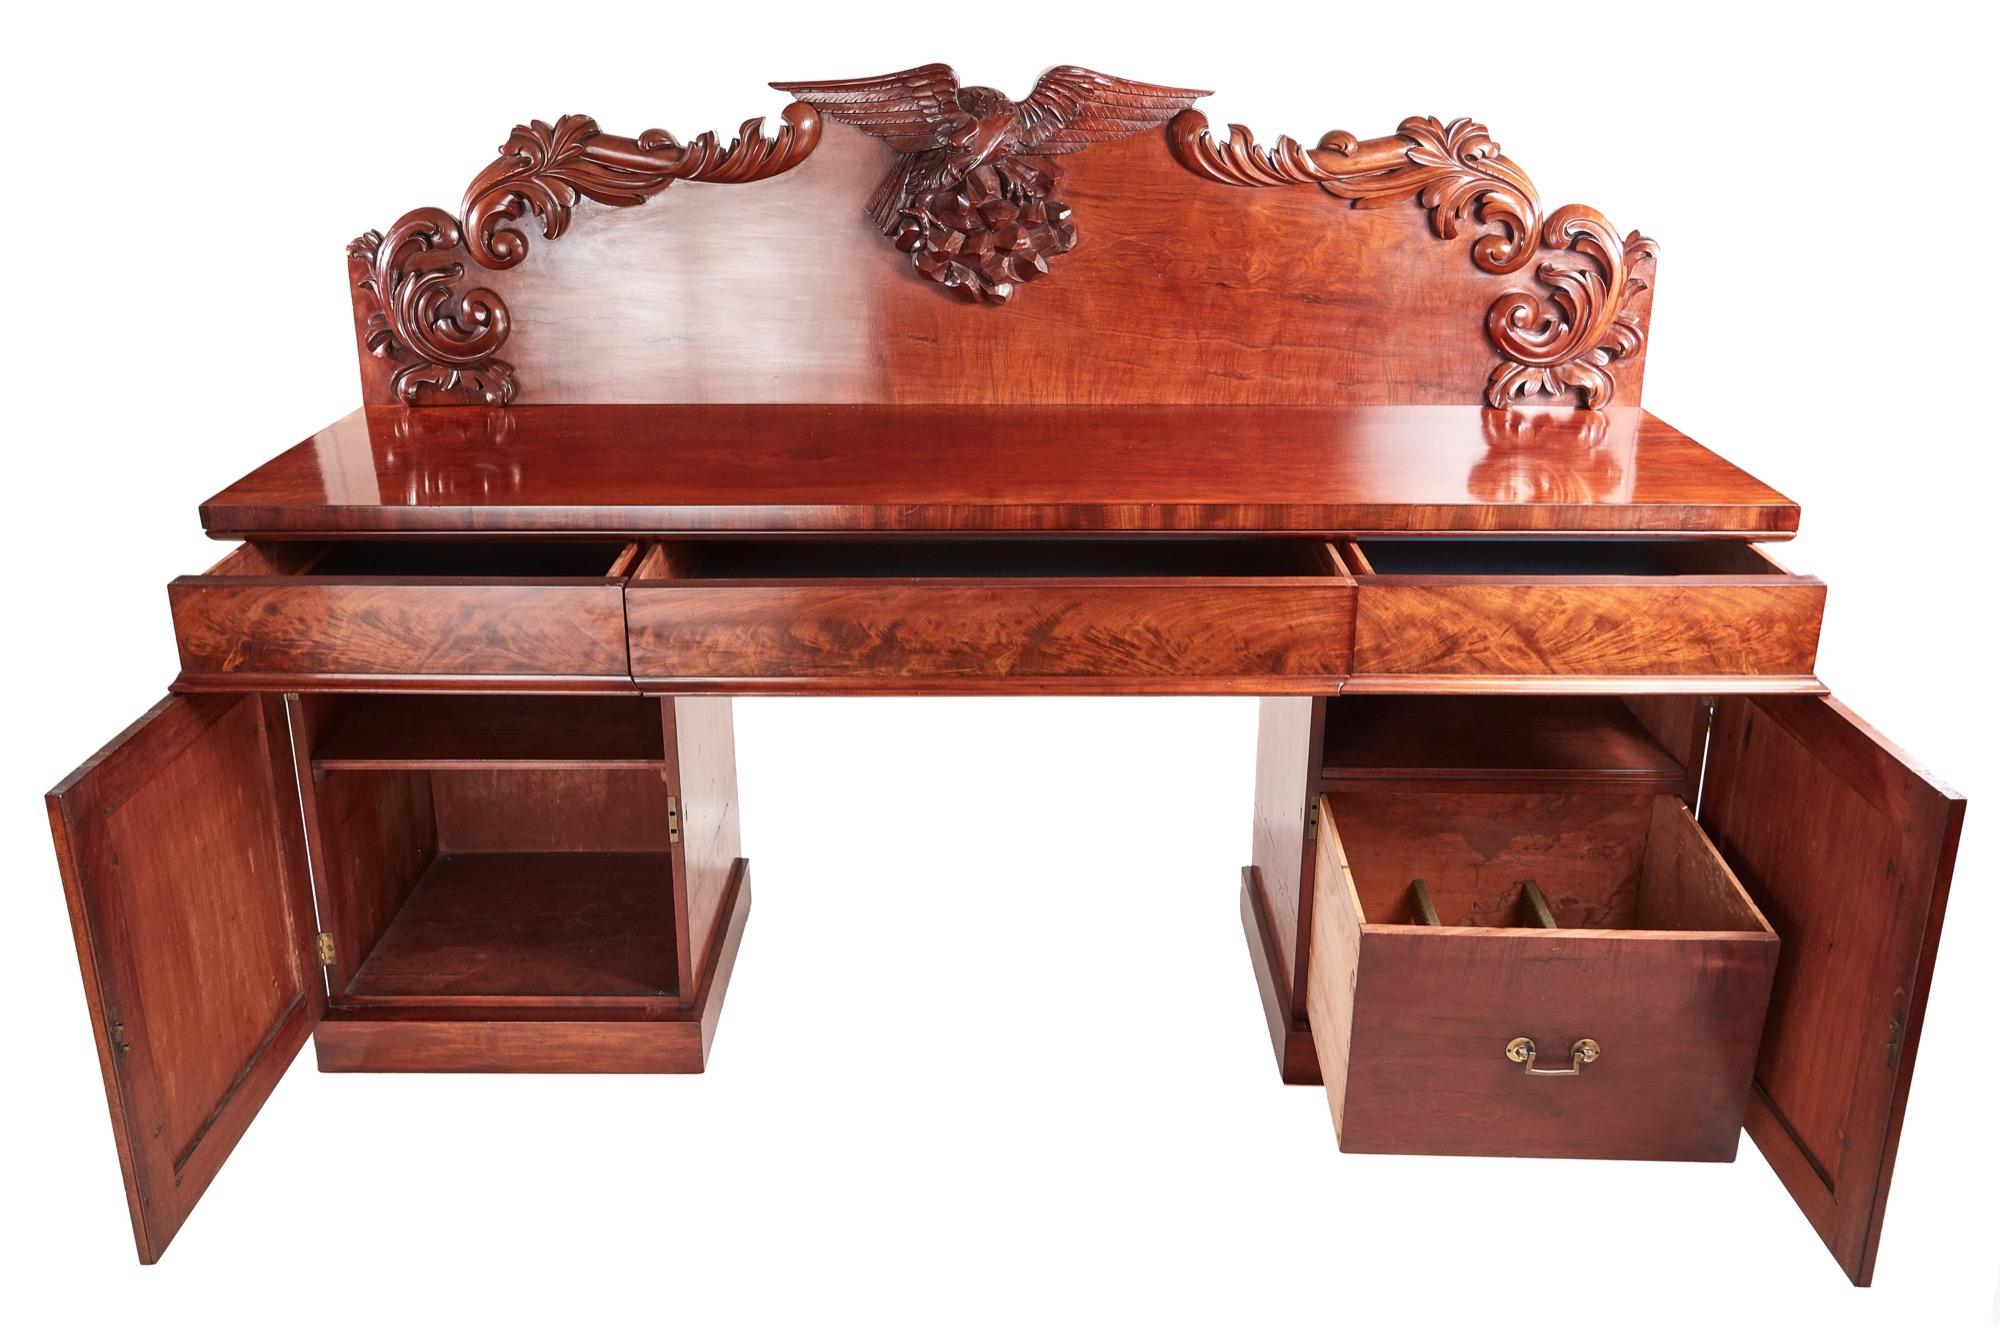 Quality 19th century Victorian antique carved mahogany sideboard. It has a lovely mahogany top with three frieze drawers and is supported by two pedestals with quality carved doors. It has a fitted interior. It stands on a plinth base. All